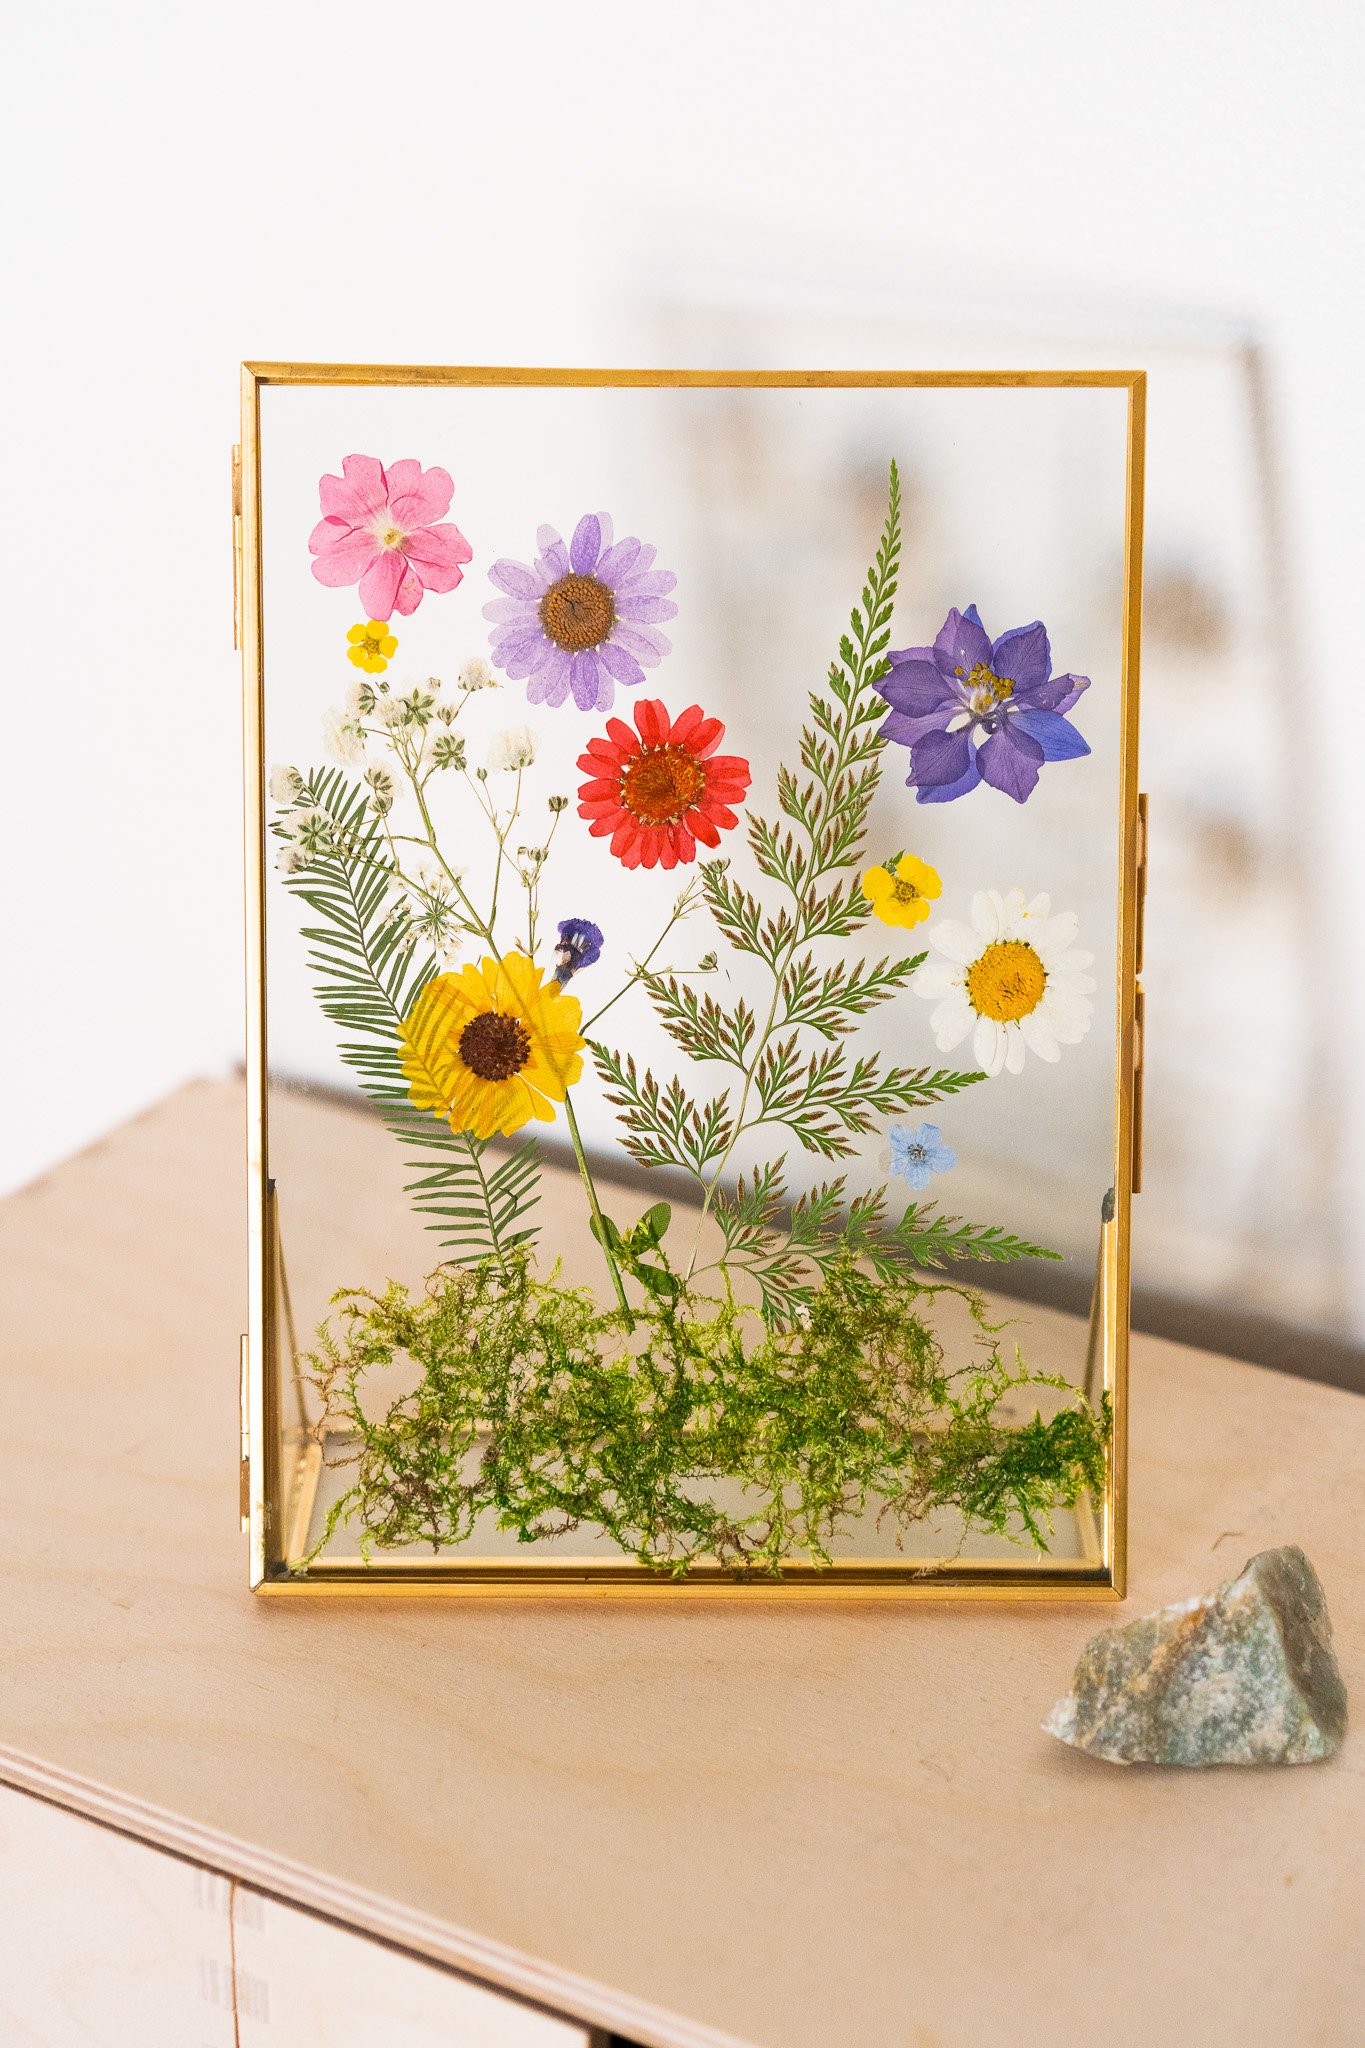 Whimsical Pressed Flower Crafts — My Moonstone Kitchen